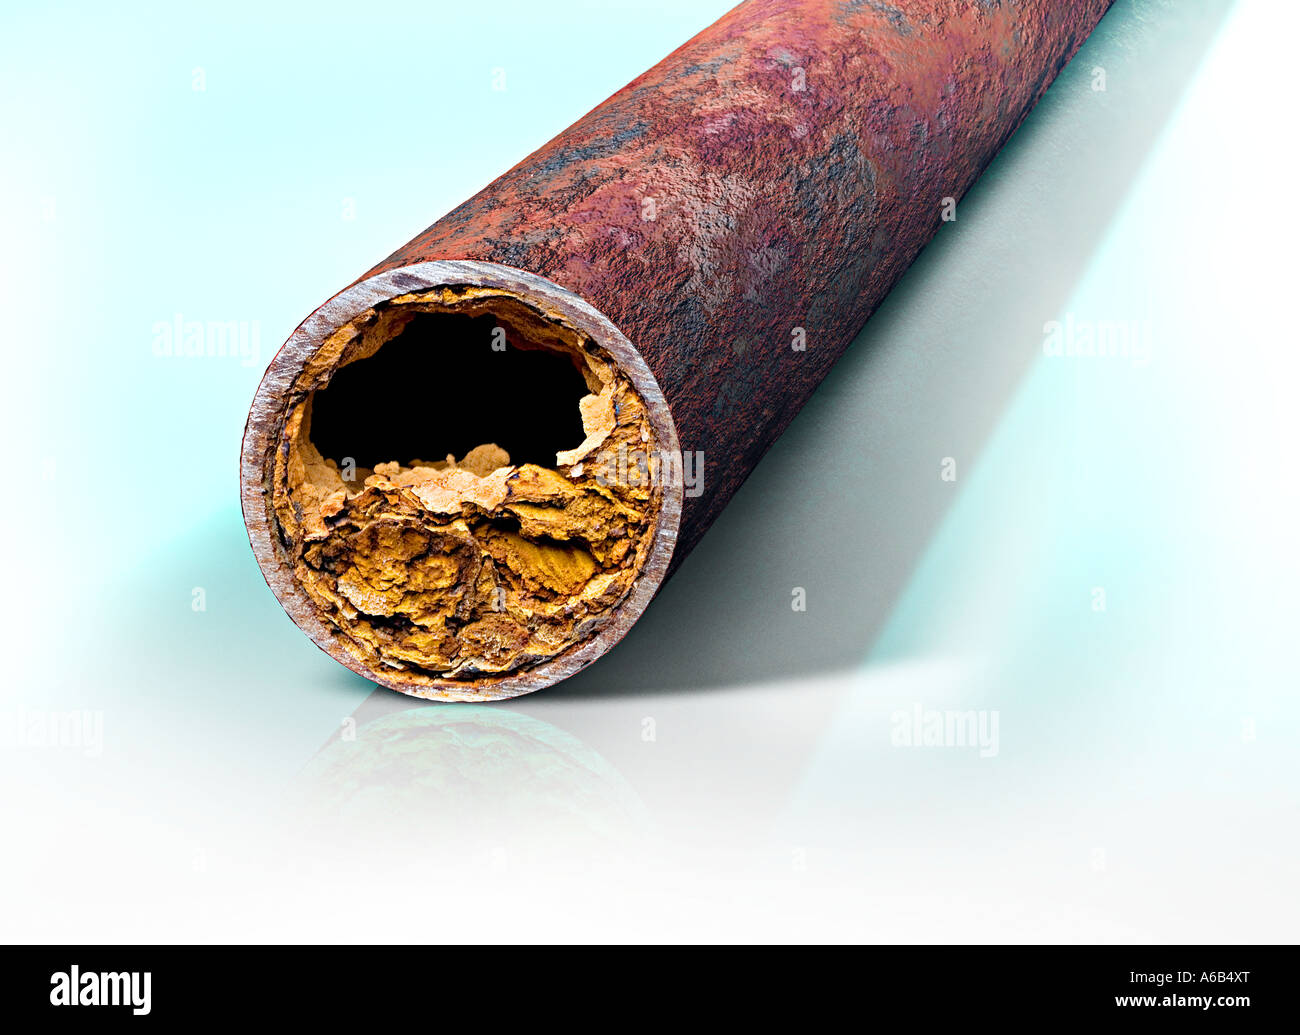 rusty and calcifyed pipe tube calcium rust symbol of calcification arteriosclerosis oxidation Stock Photo